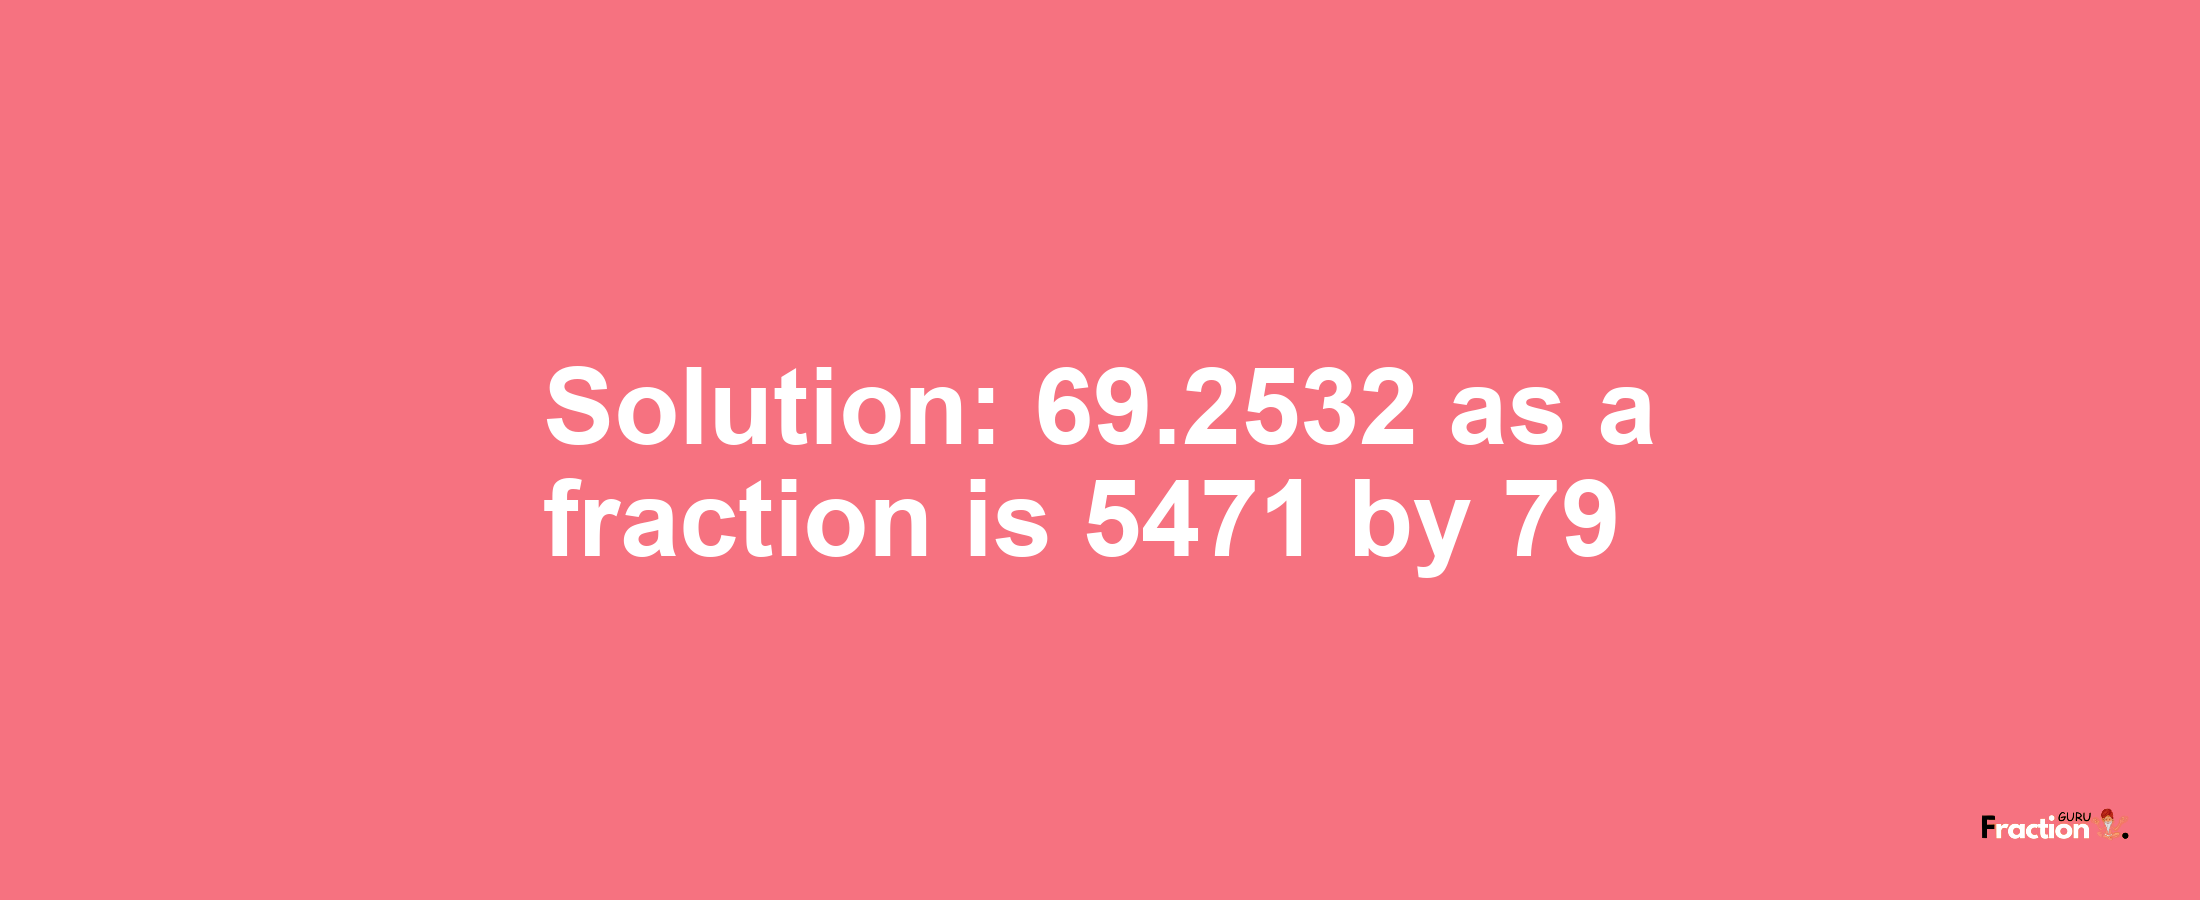 Solution:69.2532 as a fraction is 5471/79